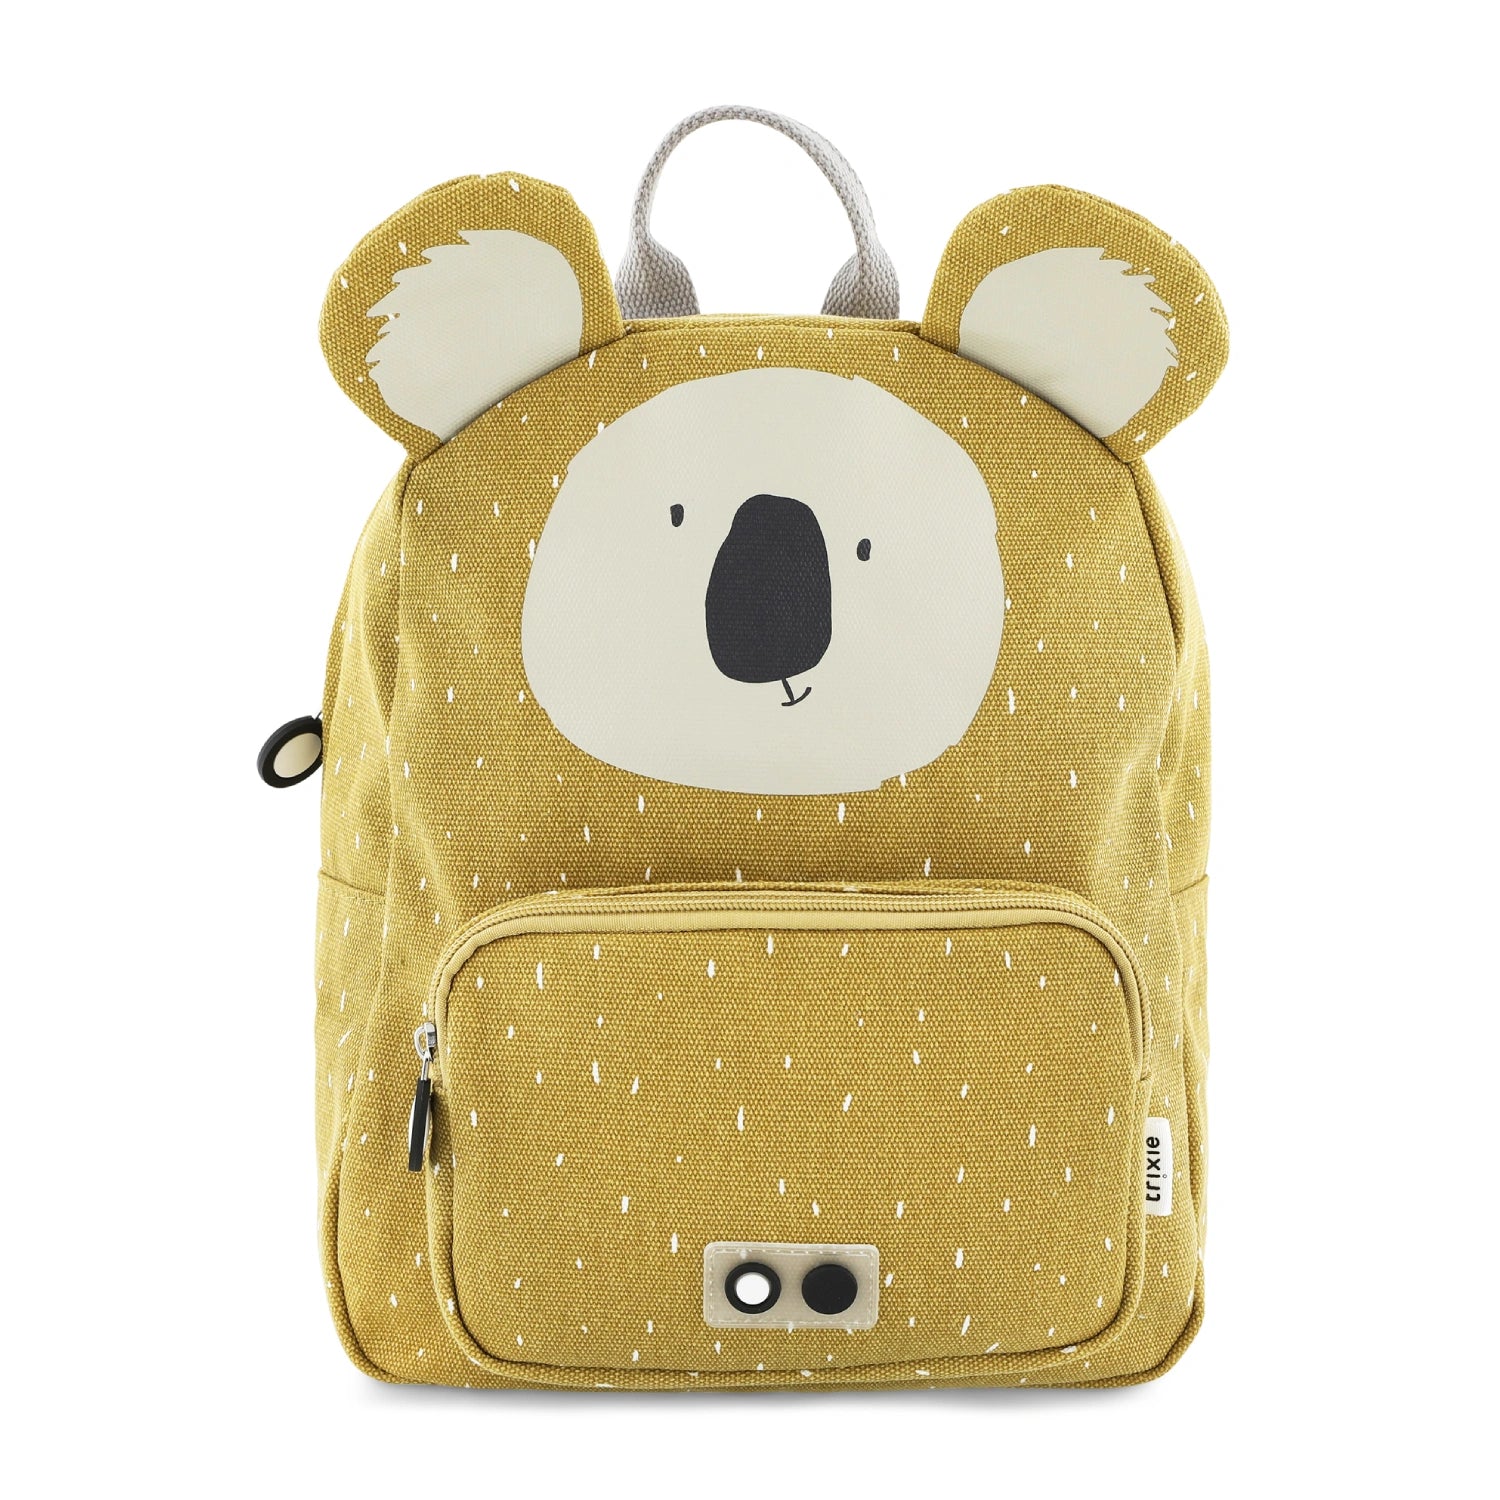 An image of Kids School Backpack - Trixie Bag Collection Mr. Koala